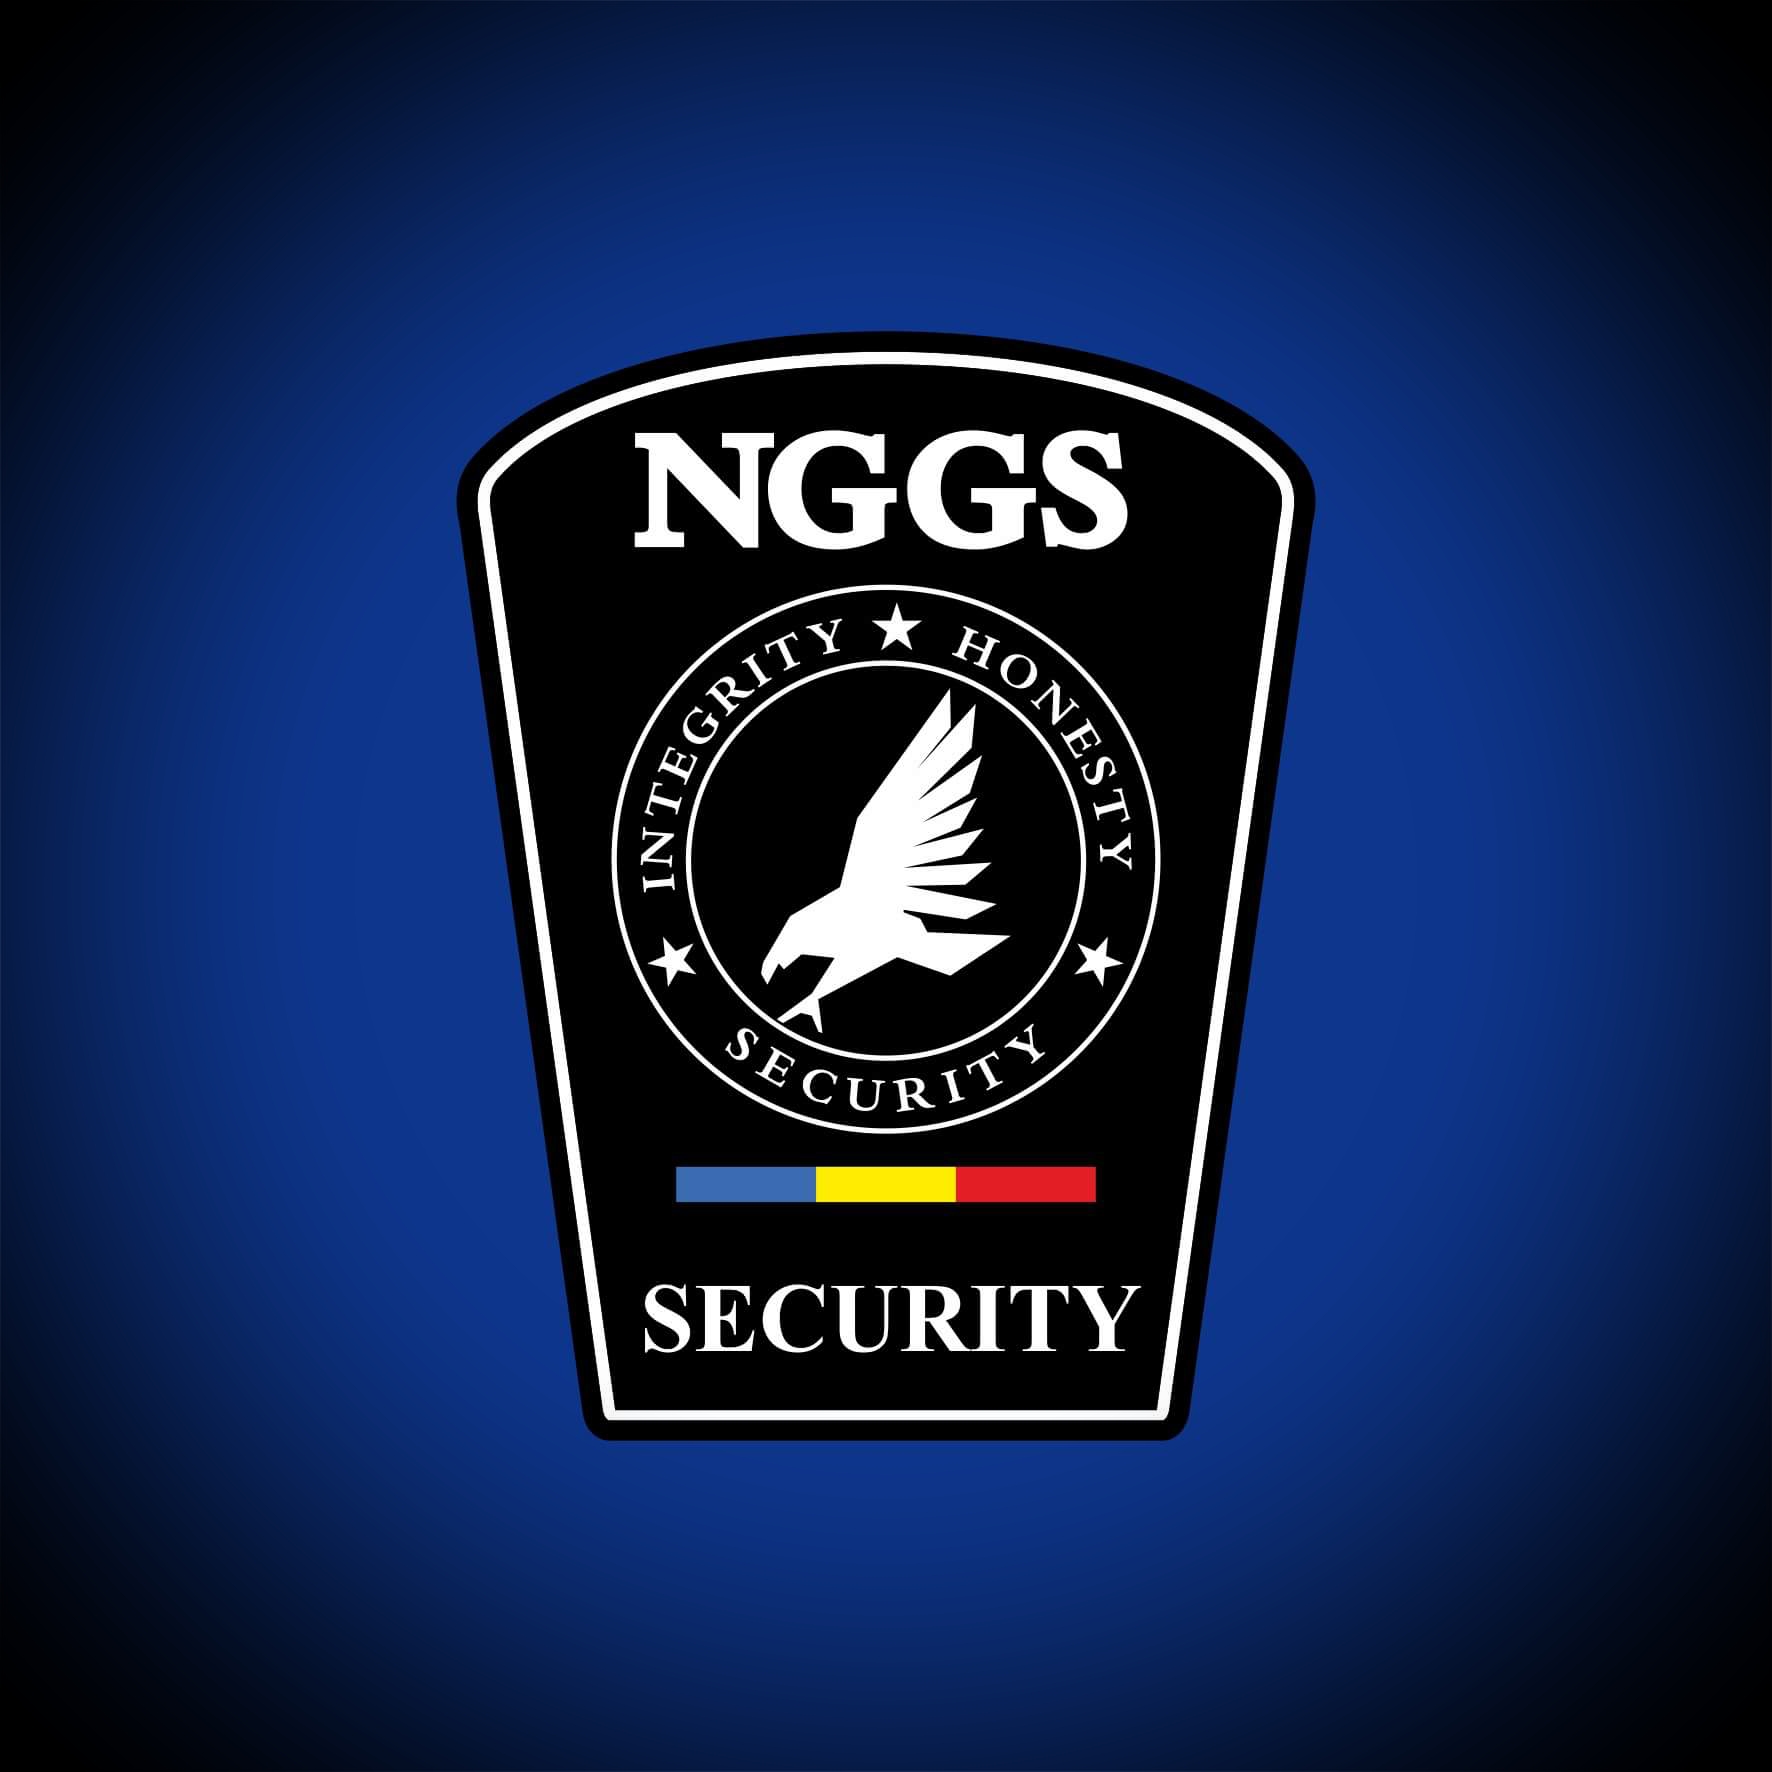 NGGS SECURITY